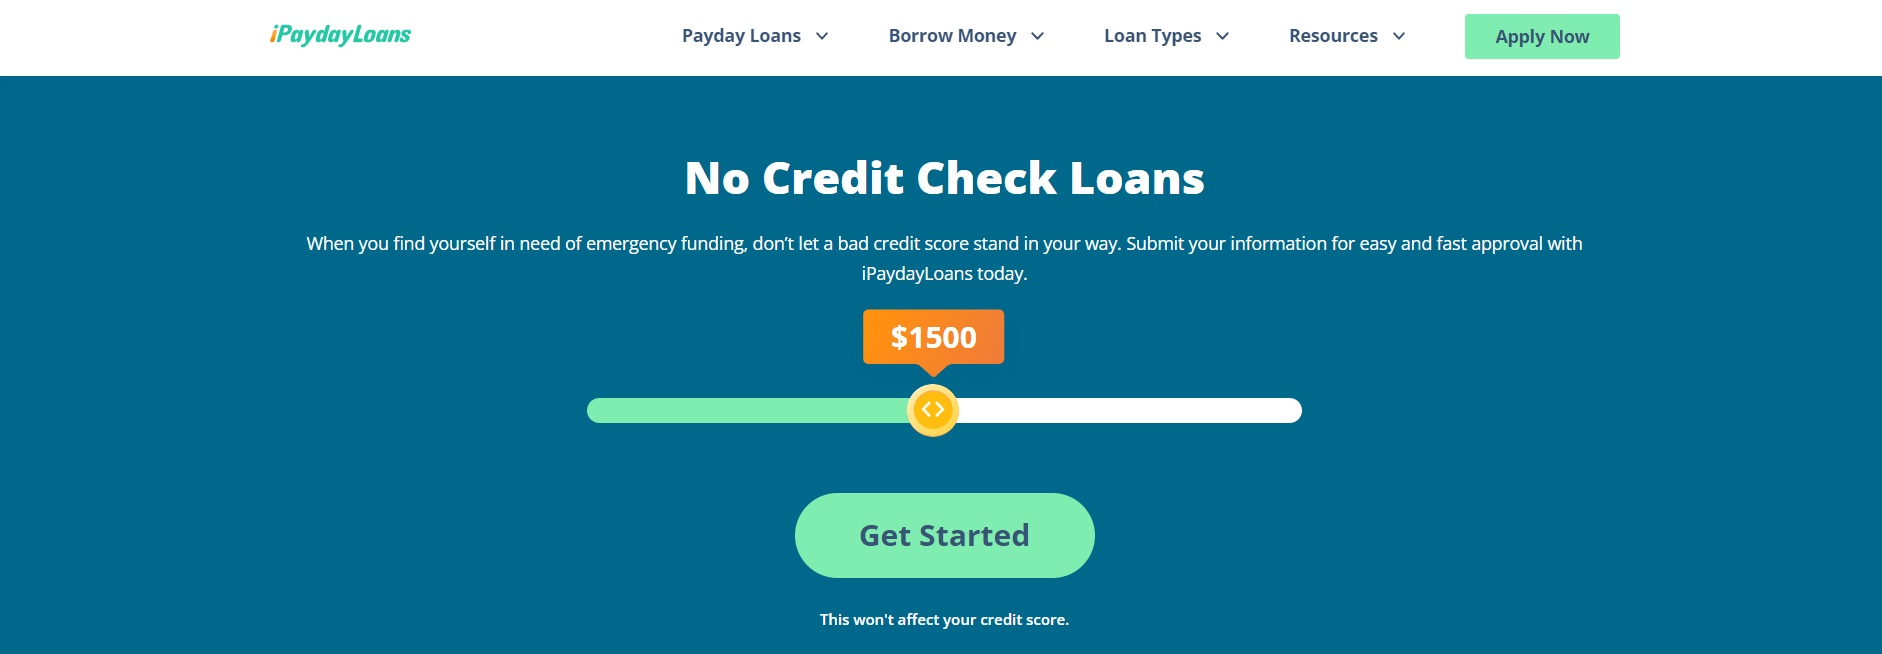 How To Take Out Loans With No Credit Check 